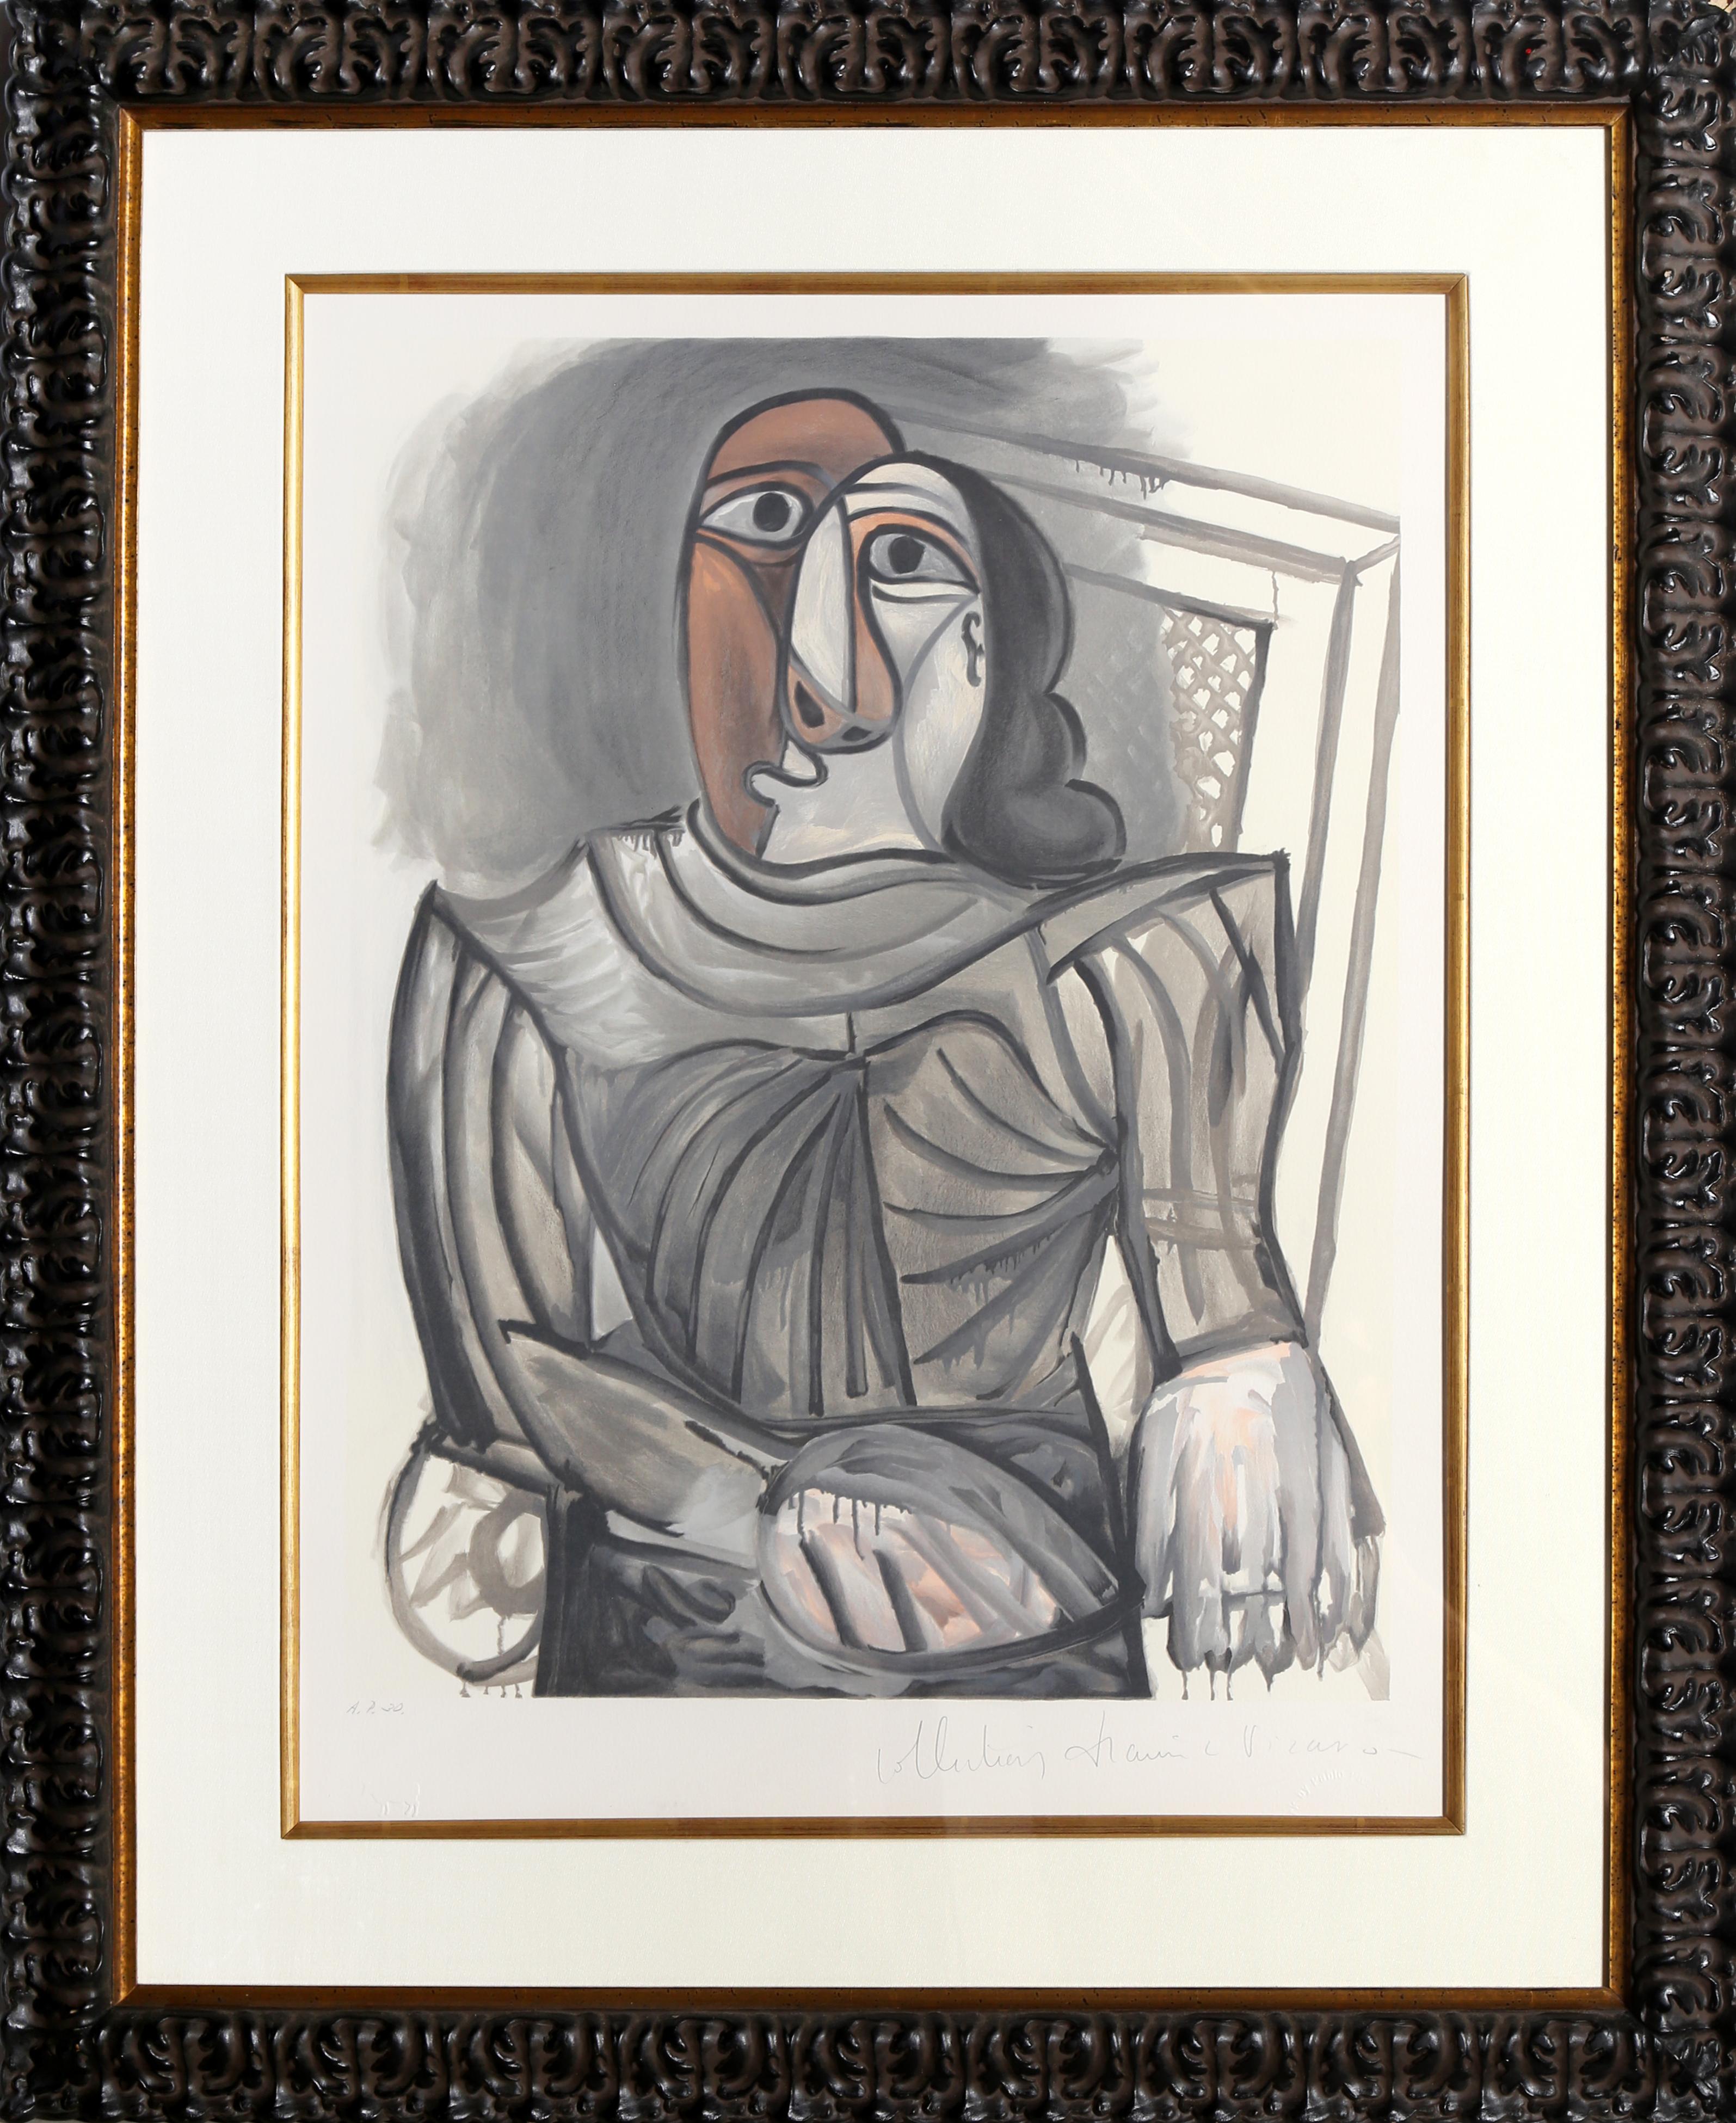 A lithograph from the Marina Picasso Estate Collection after the Pablo Picasso painting "Femme Assise a la Robe Grise".  The original painting was completed in 1943. In the 1970's after Picasso's death, Marina Picasso, his granddaughter, authorized